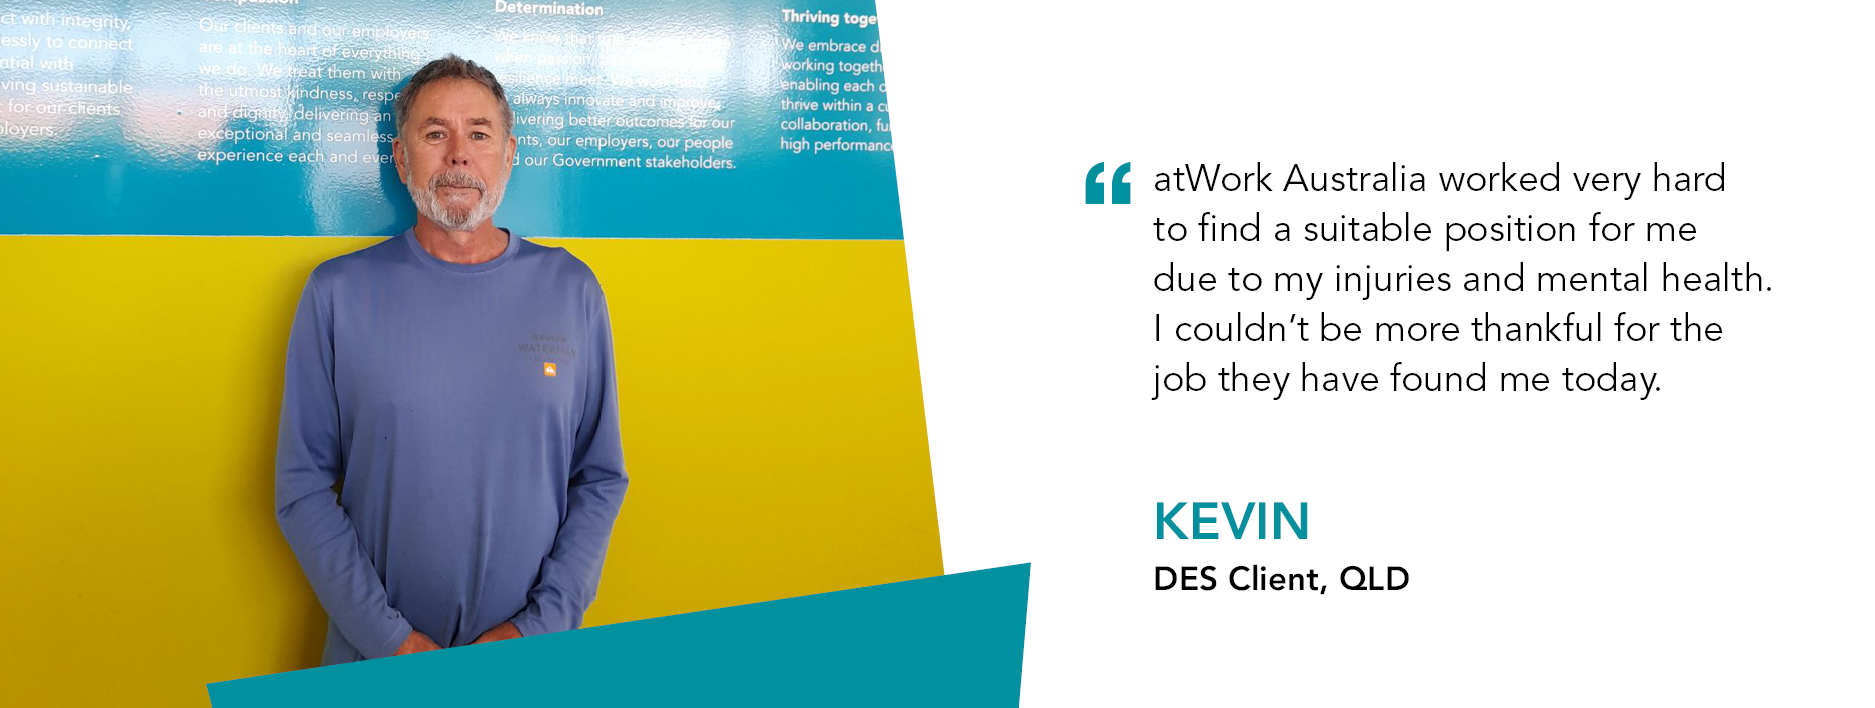 Kevin stands proudly alongside our atWork Australia values. Quote reads “atWork Australia worked very hard to find a suitable position for me due to my injuries and mental health. I couldn't be more thankful for the job they have found me today,” said Kevin.